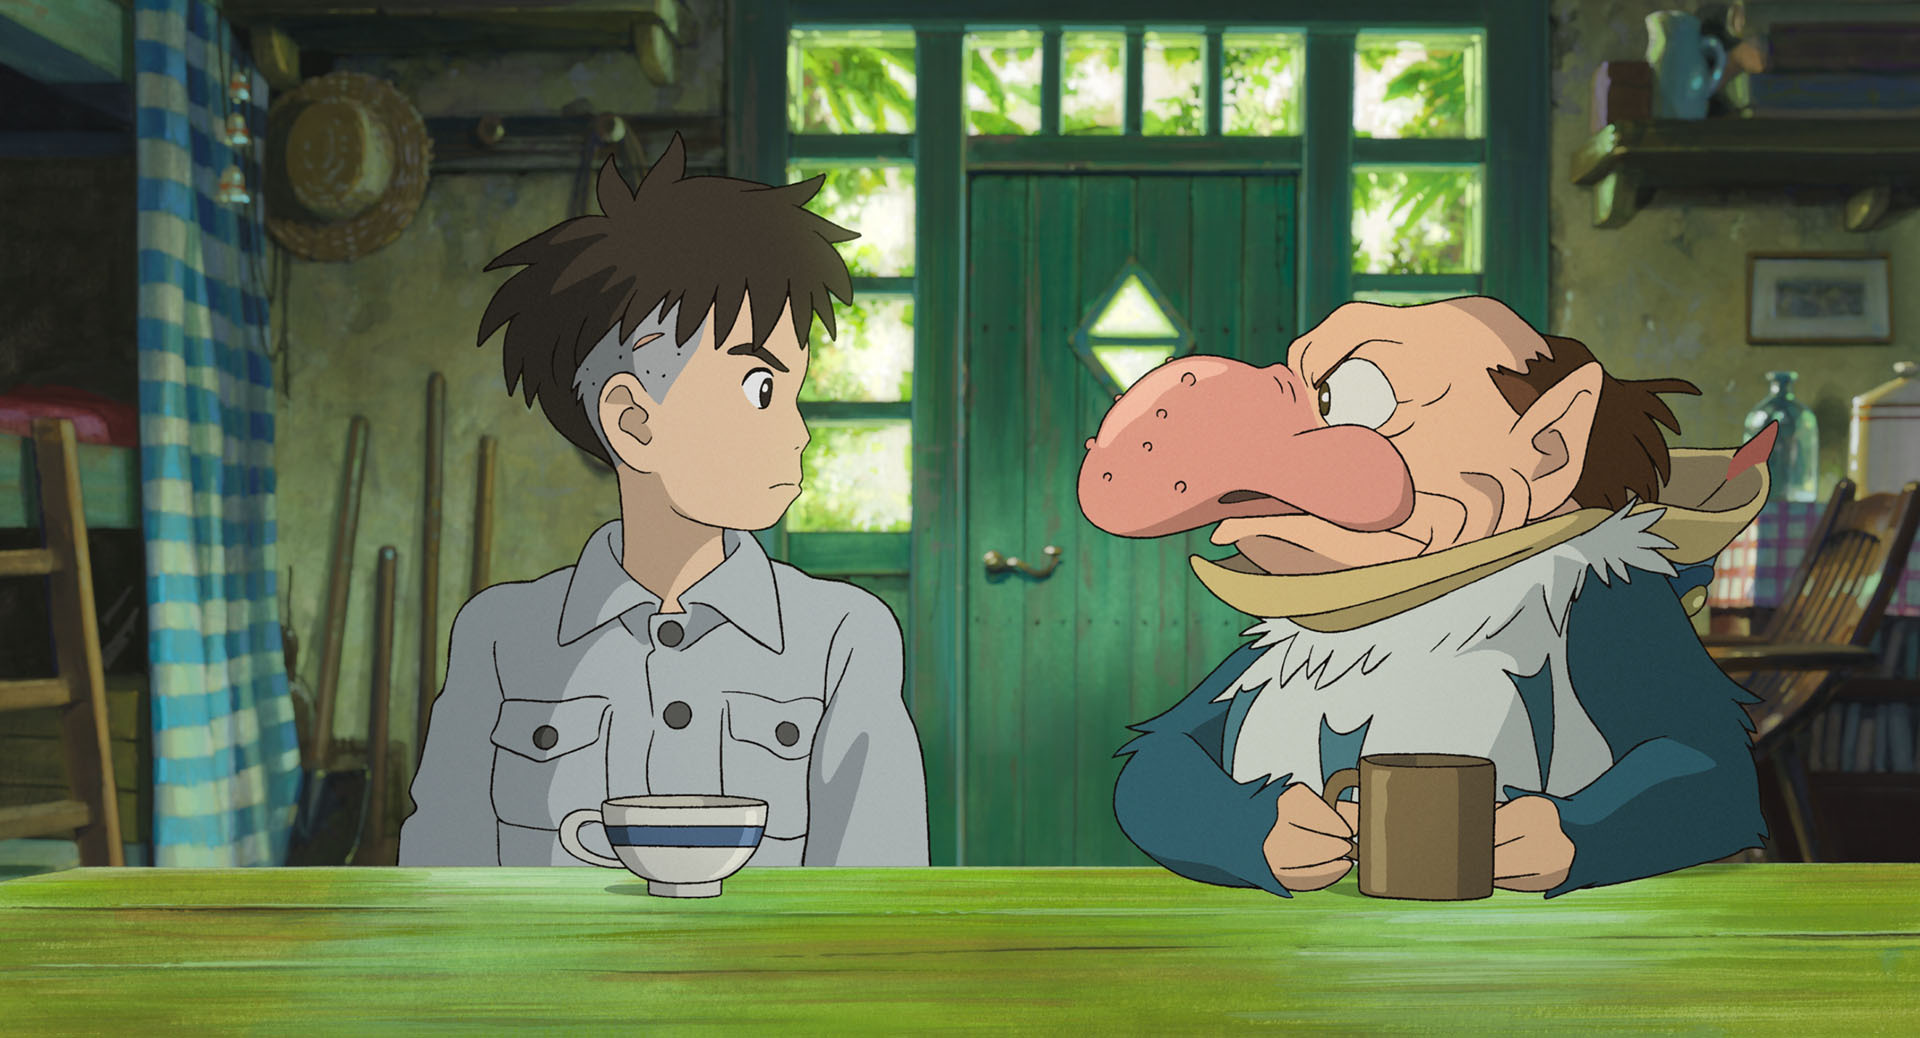 Two characters from Hayao Miyazaki’s last movie, The Boy and the Heron, sit across from each other glaring. One is a boy with a grey shirt on and the other a strange creature with pointed ears and a big nose wearing a bird suit